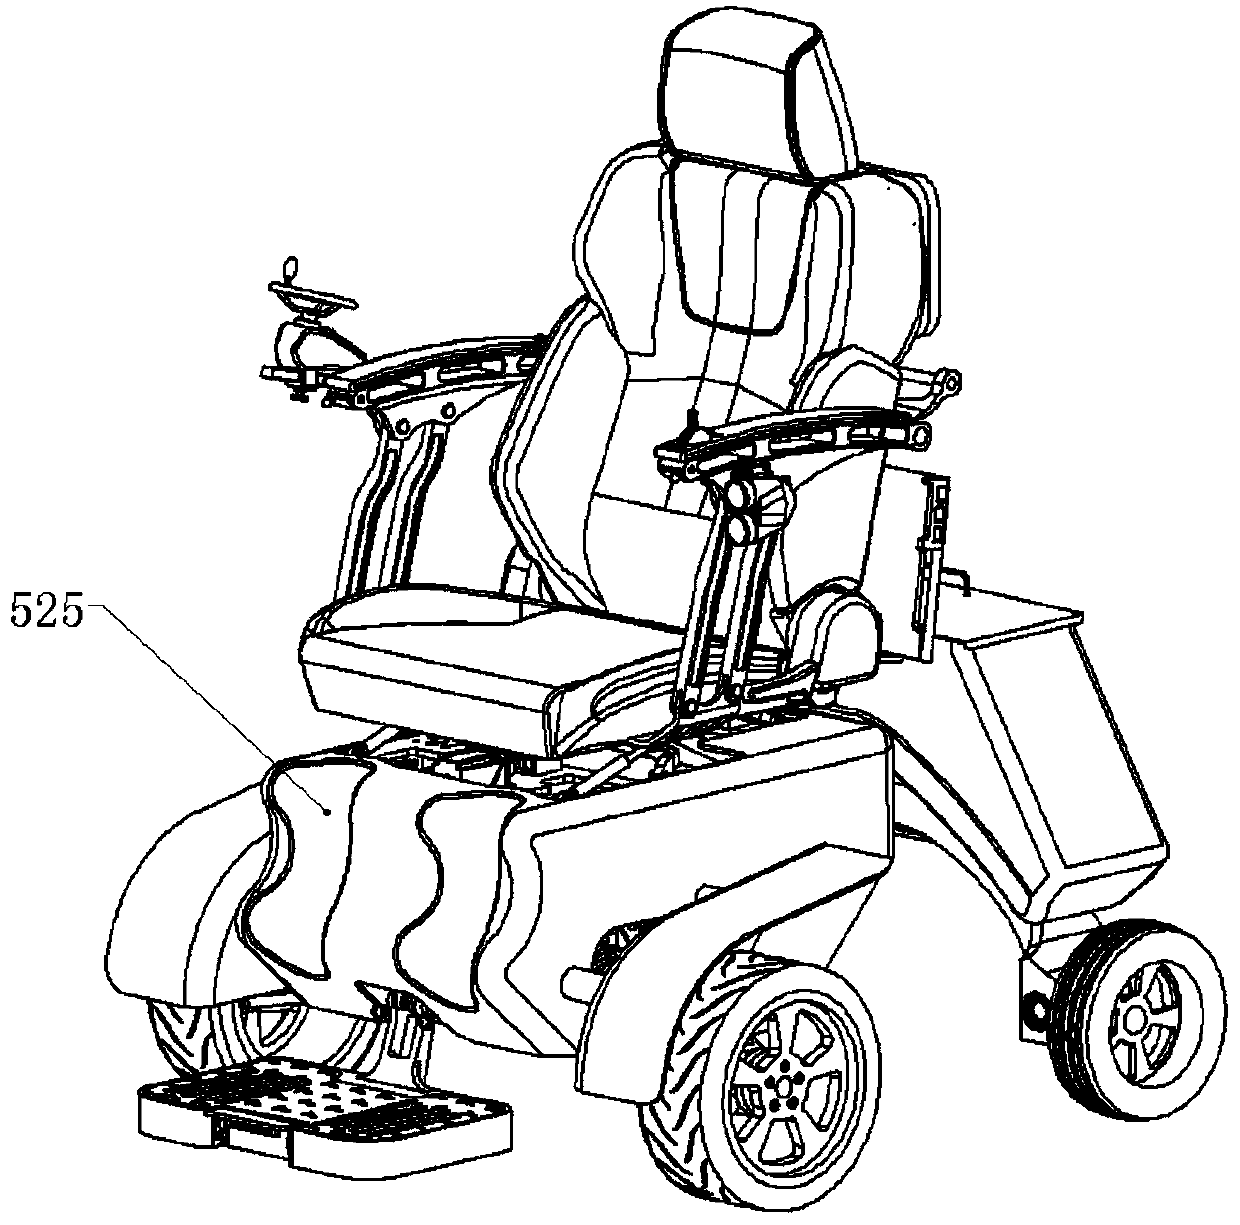 A front wheel suspension structure of an electric wheelchair